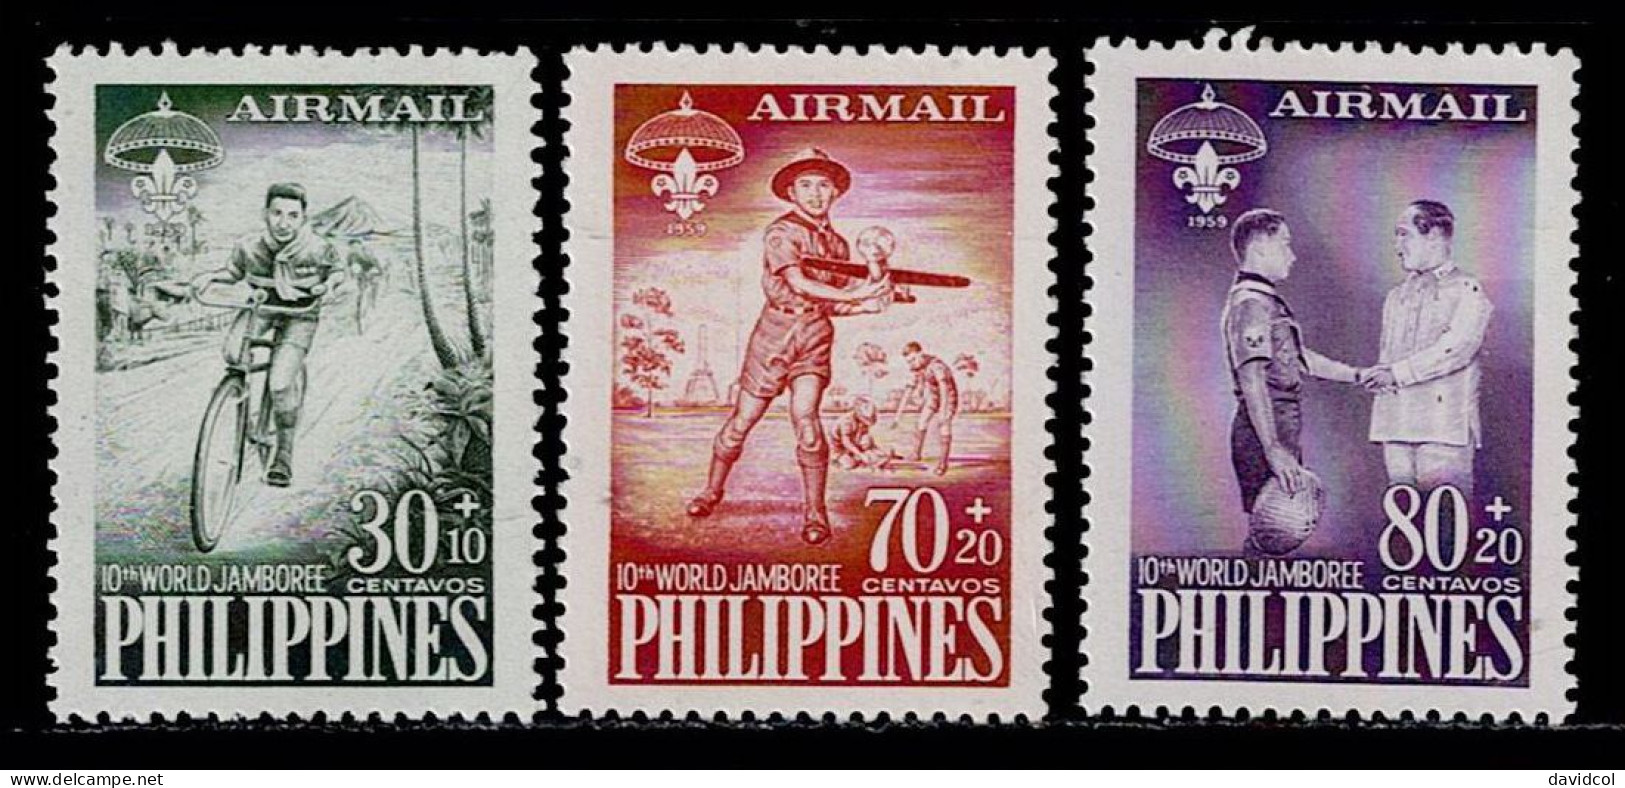 FIL-11- PHILIPPINES - 1959 - MNH -SCOUTS- 10TH WORLD JAMBOREE -AIR - Philippines